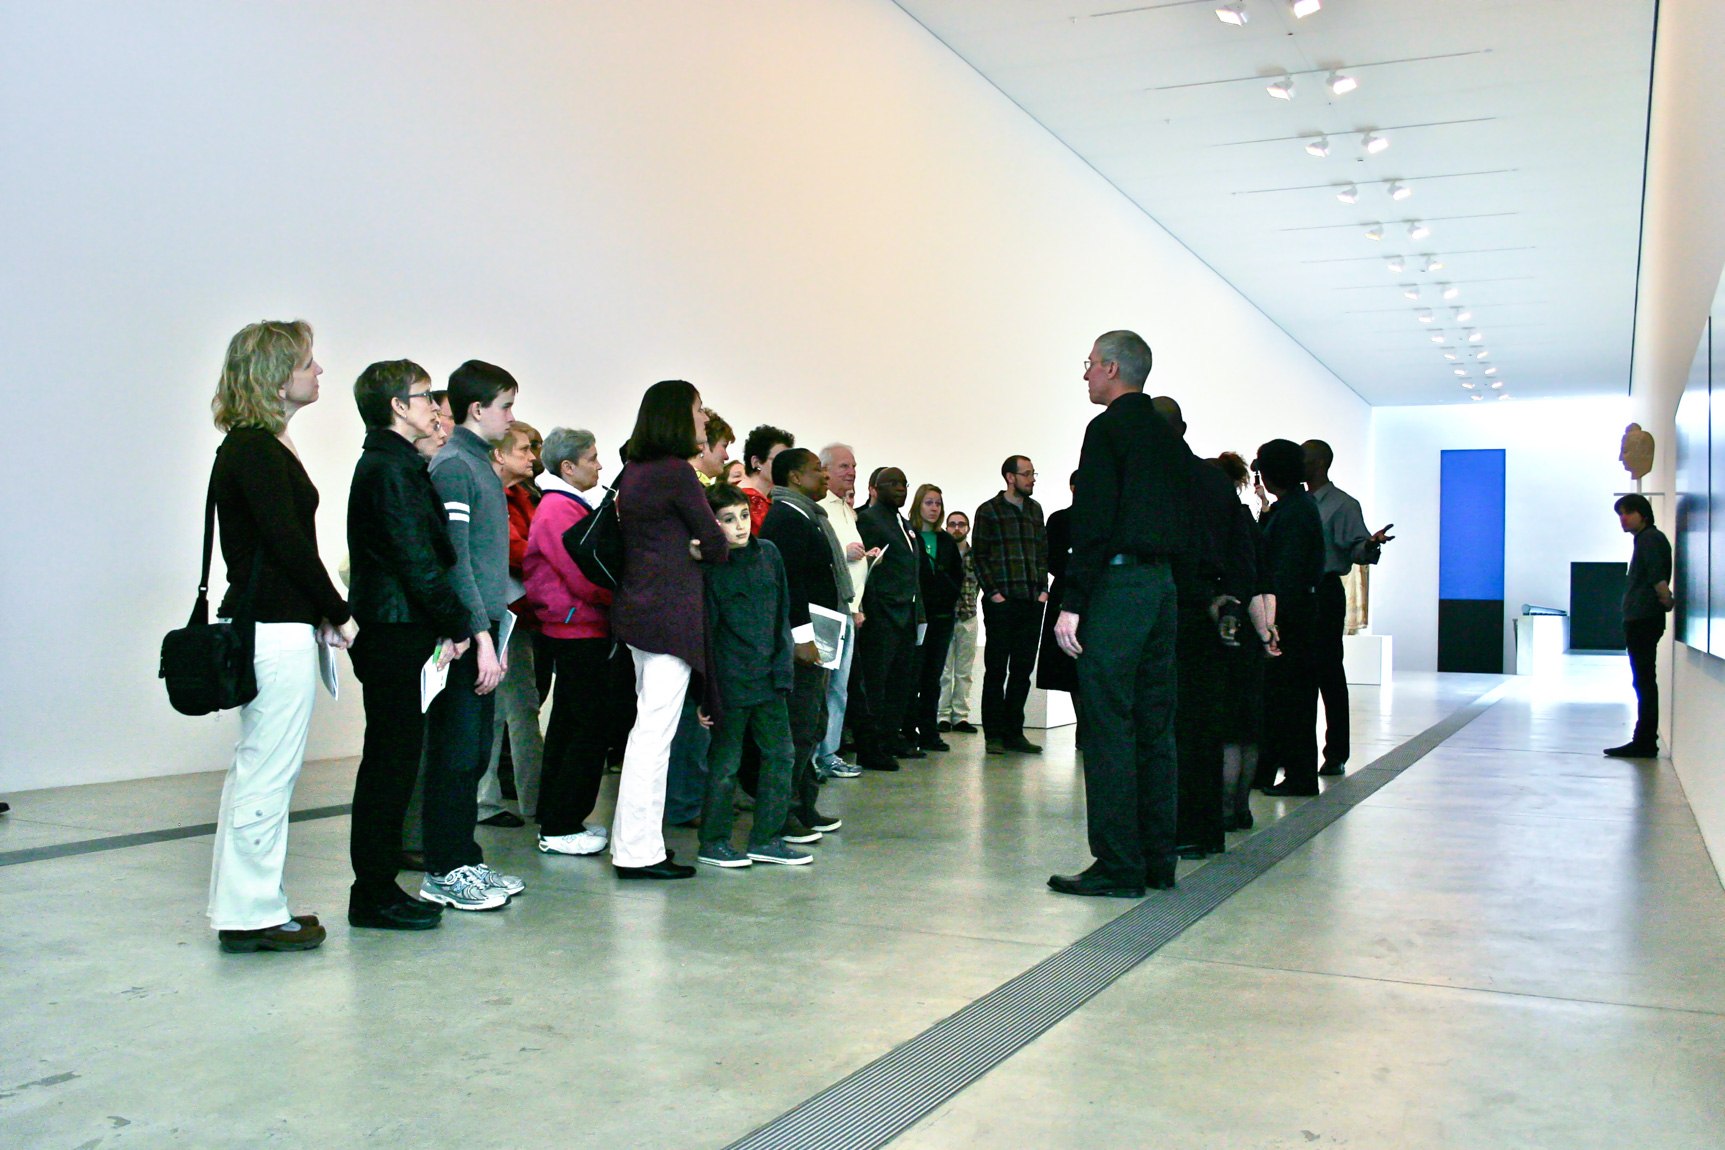 Guests listen to the participants' experiences in the Main Gallery.